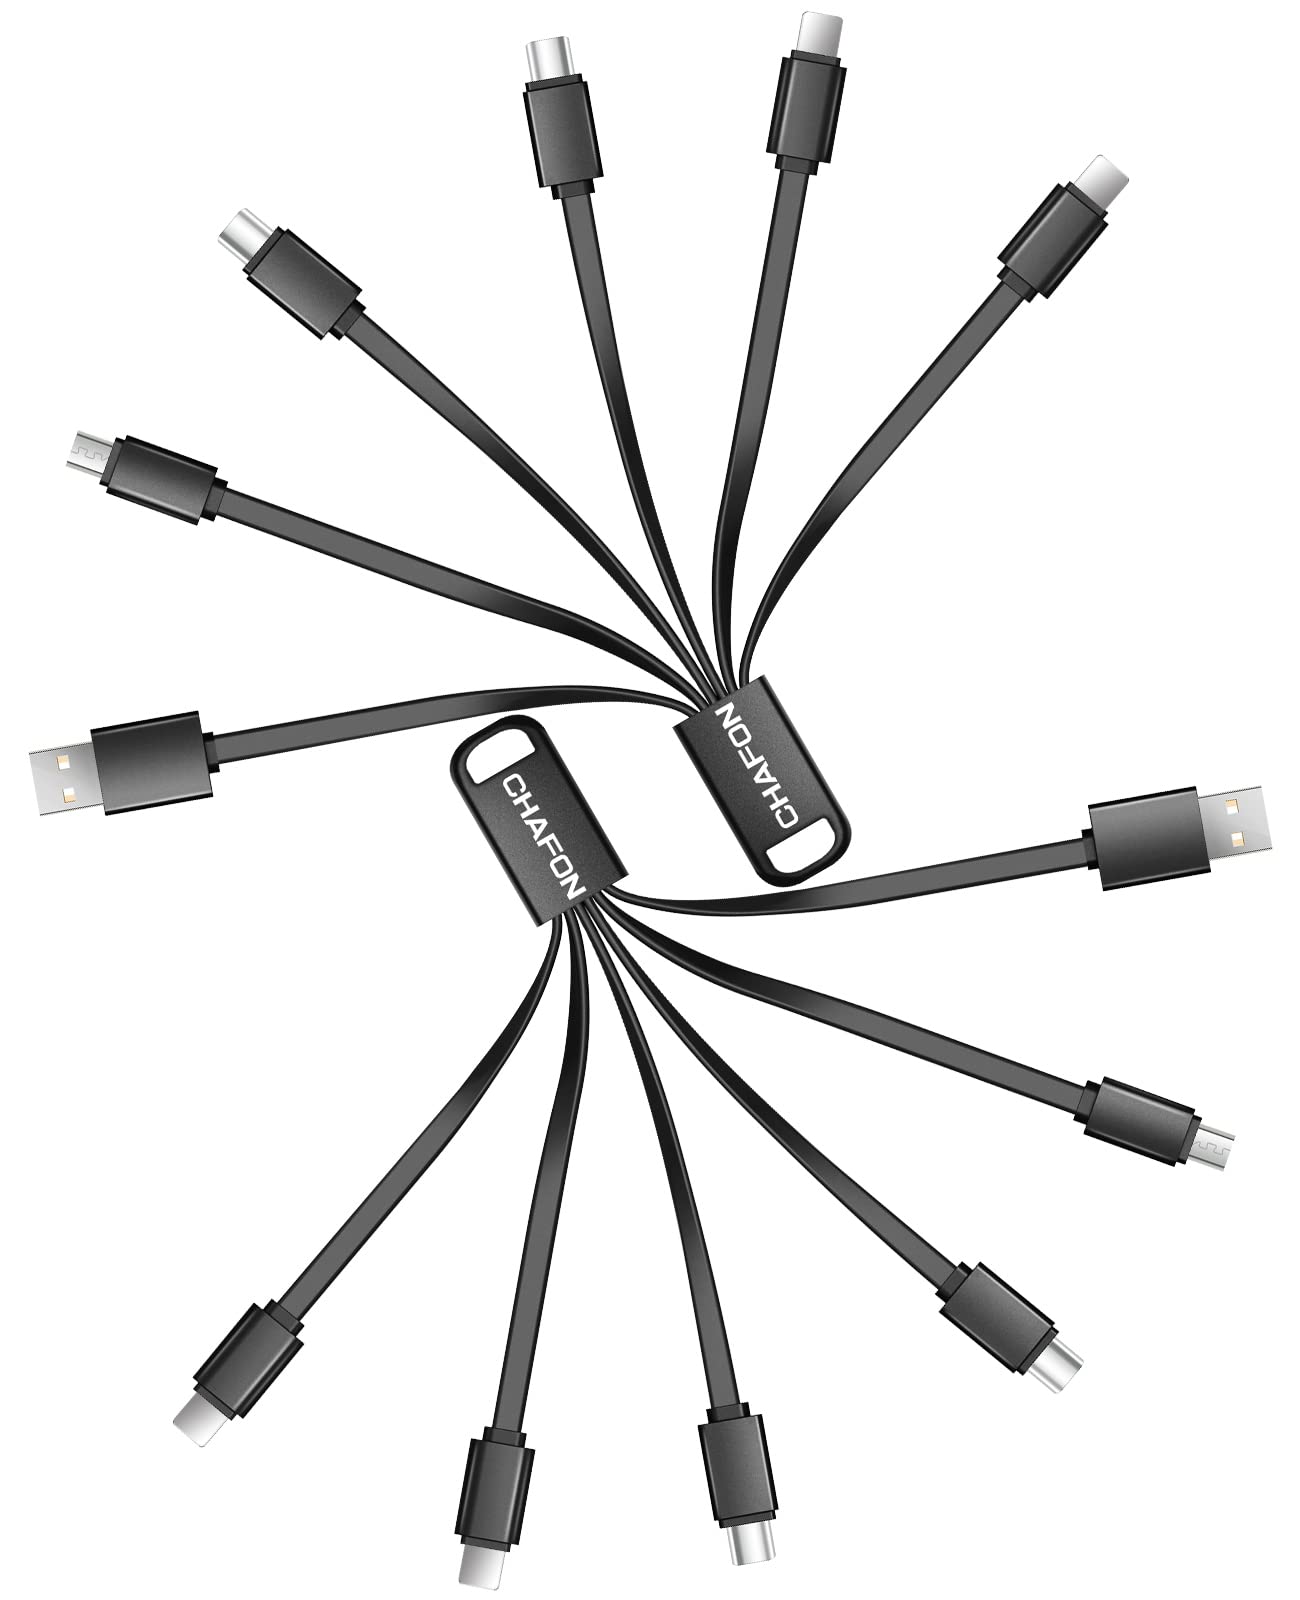 Fast-charging cable or adapter